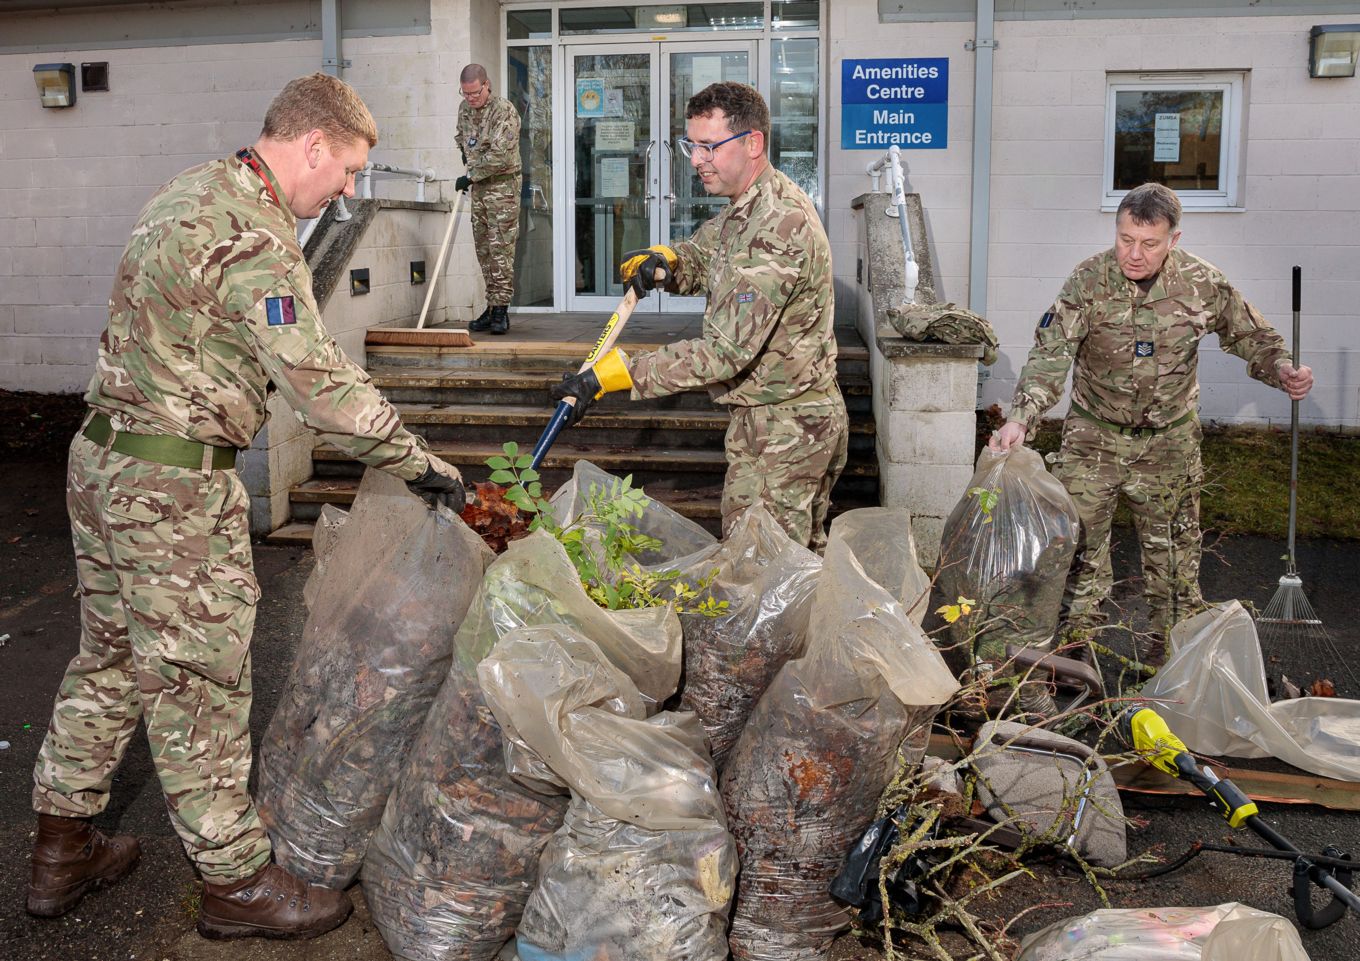 Flight Sergeant Hull, Sergeant Bannerman, Sergeant Walker and Sergeant Rogers tidying up and collecting rubbish from the surrounding areas of the MAC